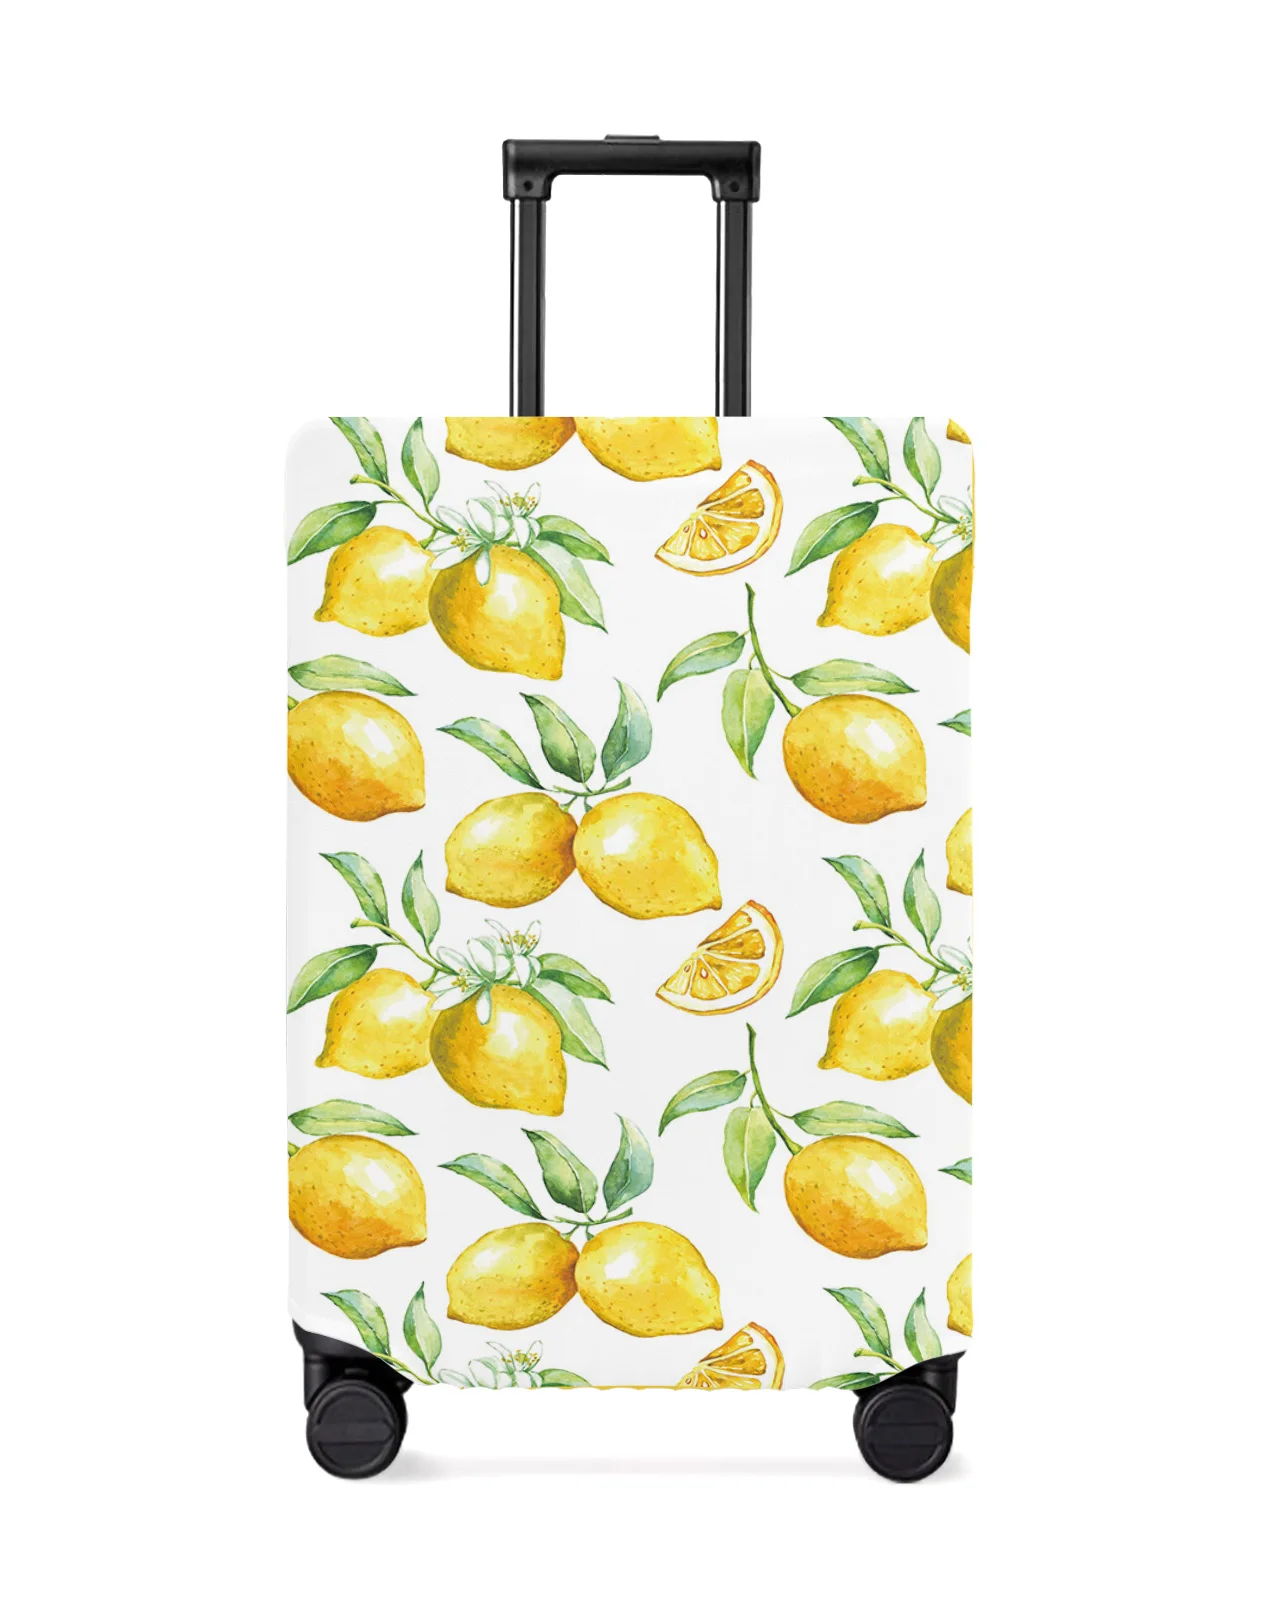 watercolor-lemon-fruit-travel-luggage-protective-cover-for-travel-accessories-suitcase-elastic-dust-case-protect-sleeve